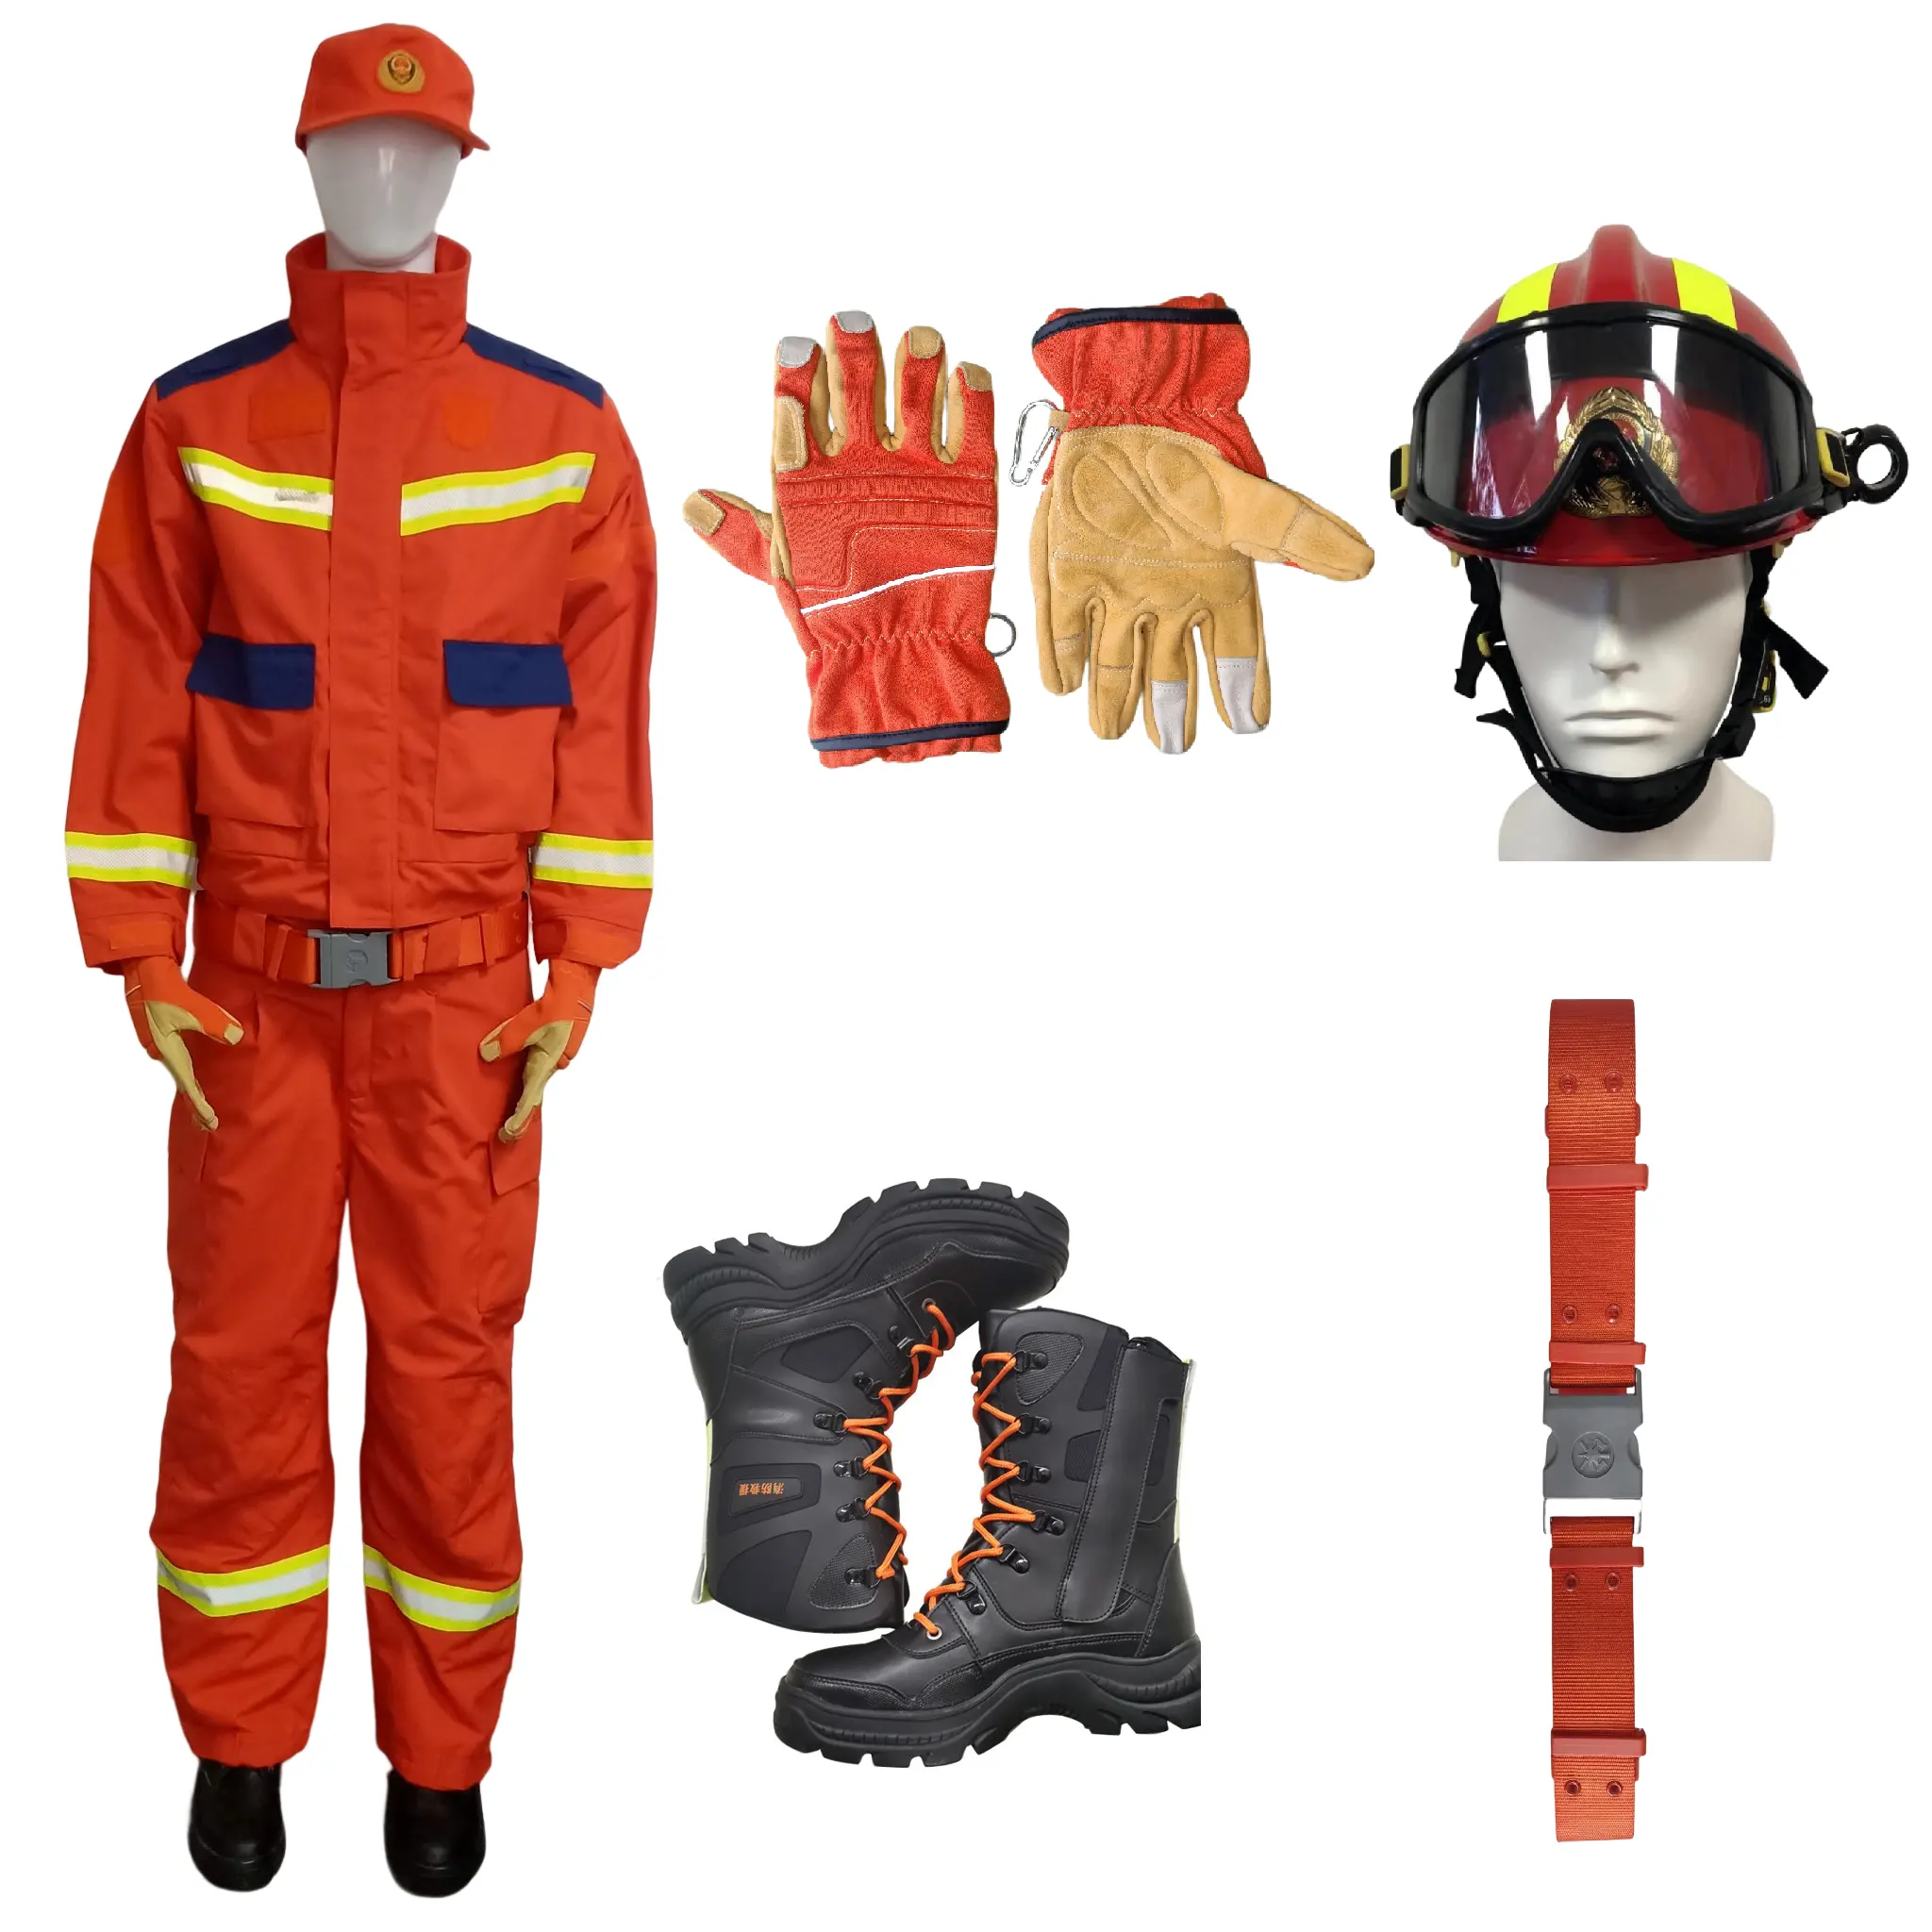 Five-piece of fire rescue clothing emergency rescue suit for firefighters